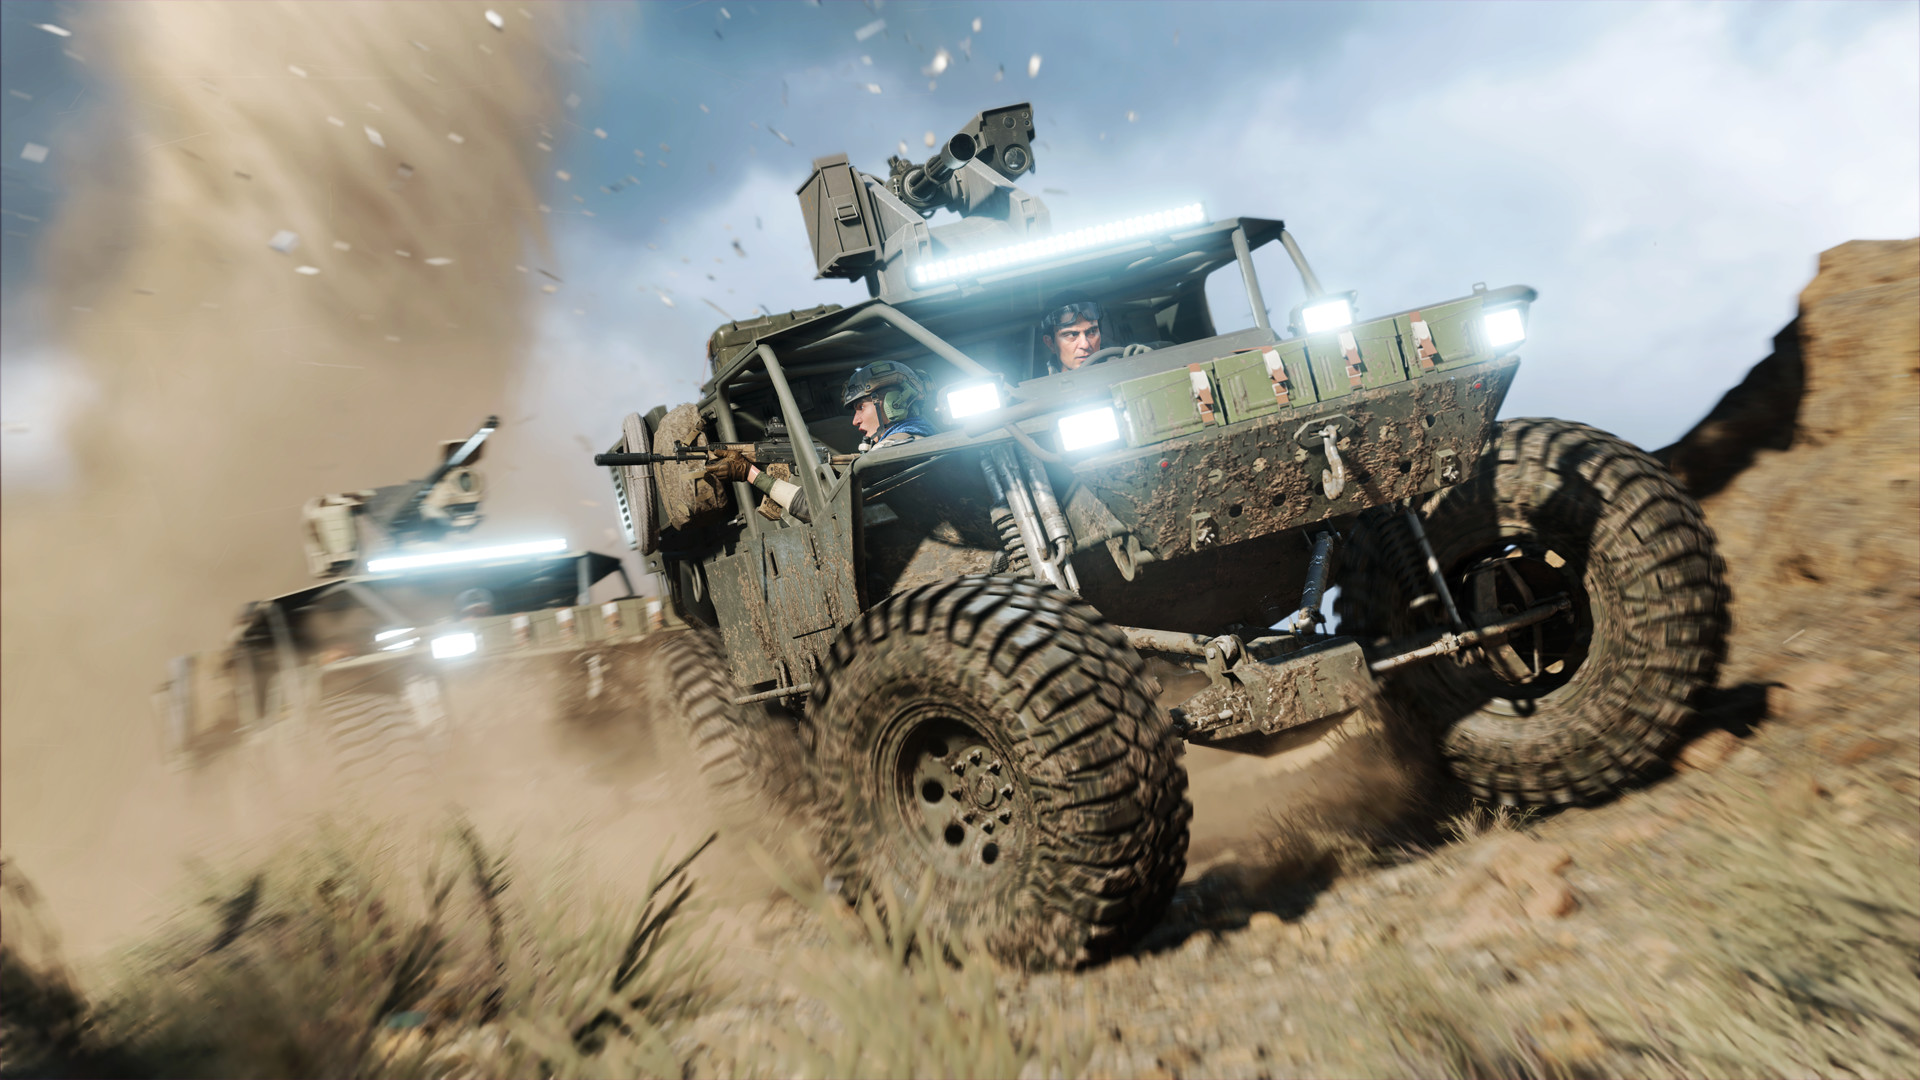 An armored car driving along a dirt road in Battlefield 2042